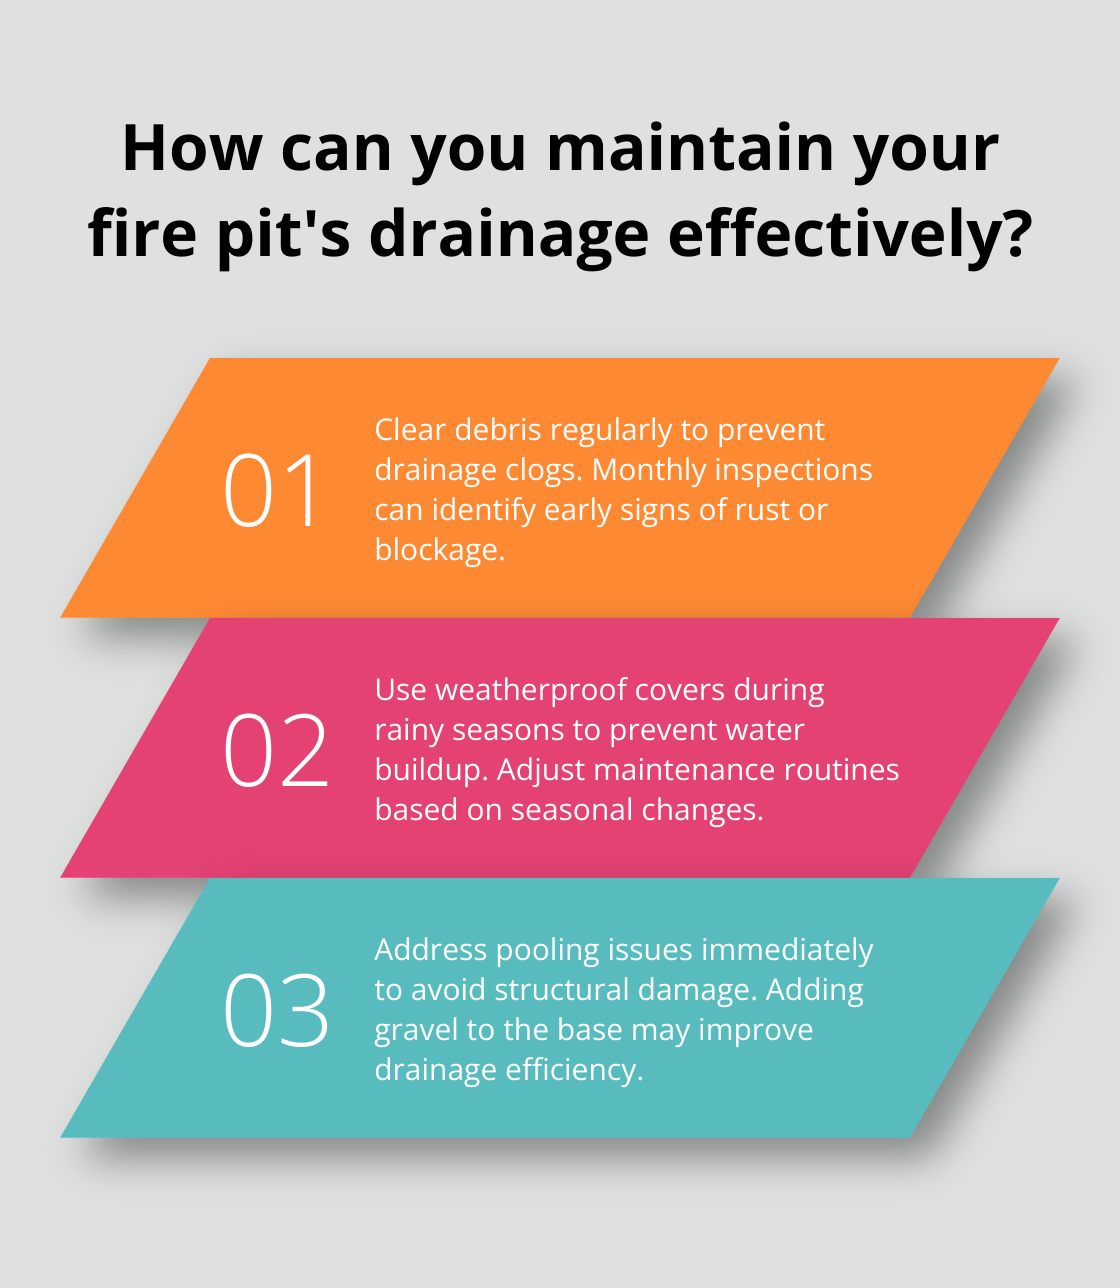 Fact - How can you maintain your fire pit's drainage effectively?